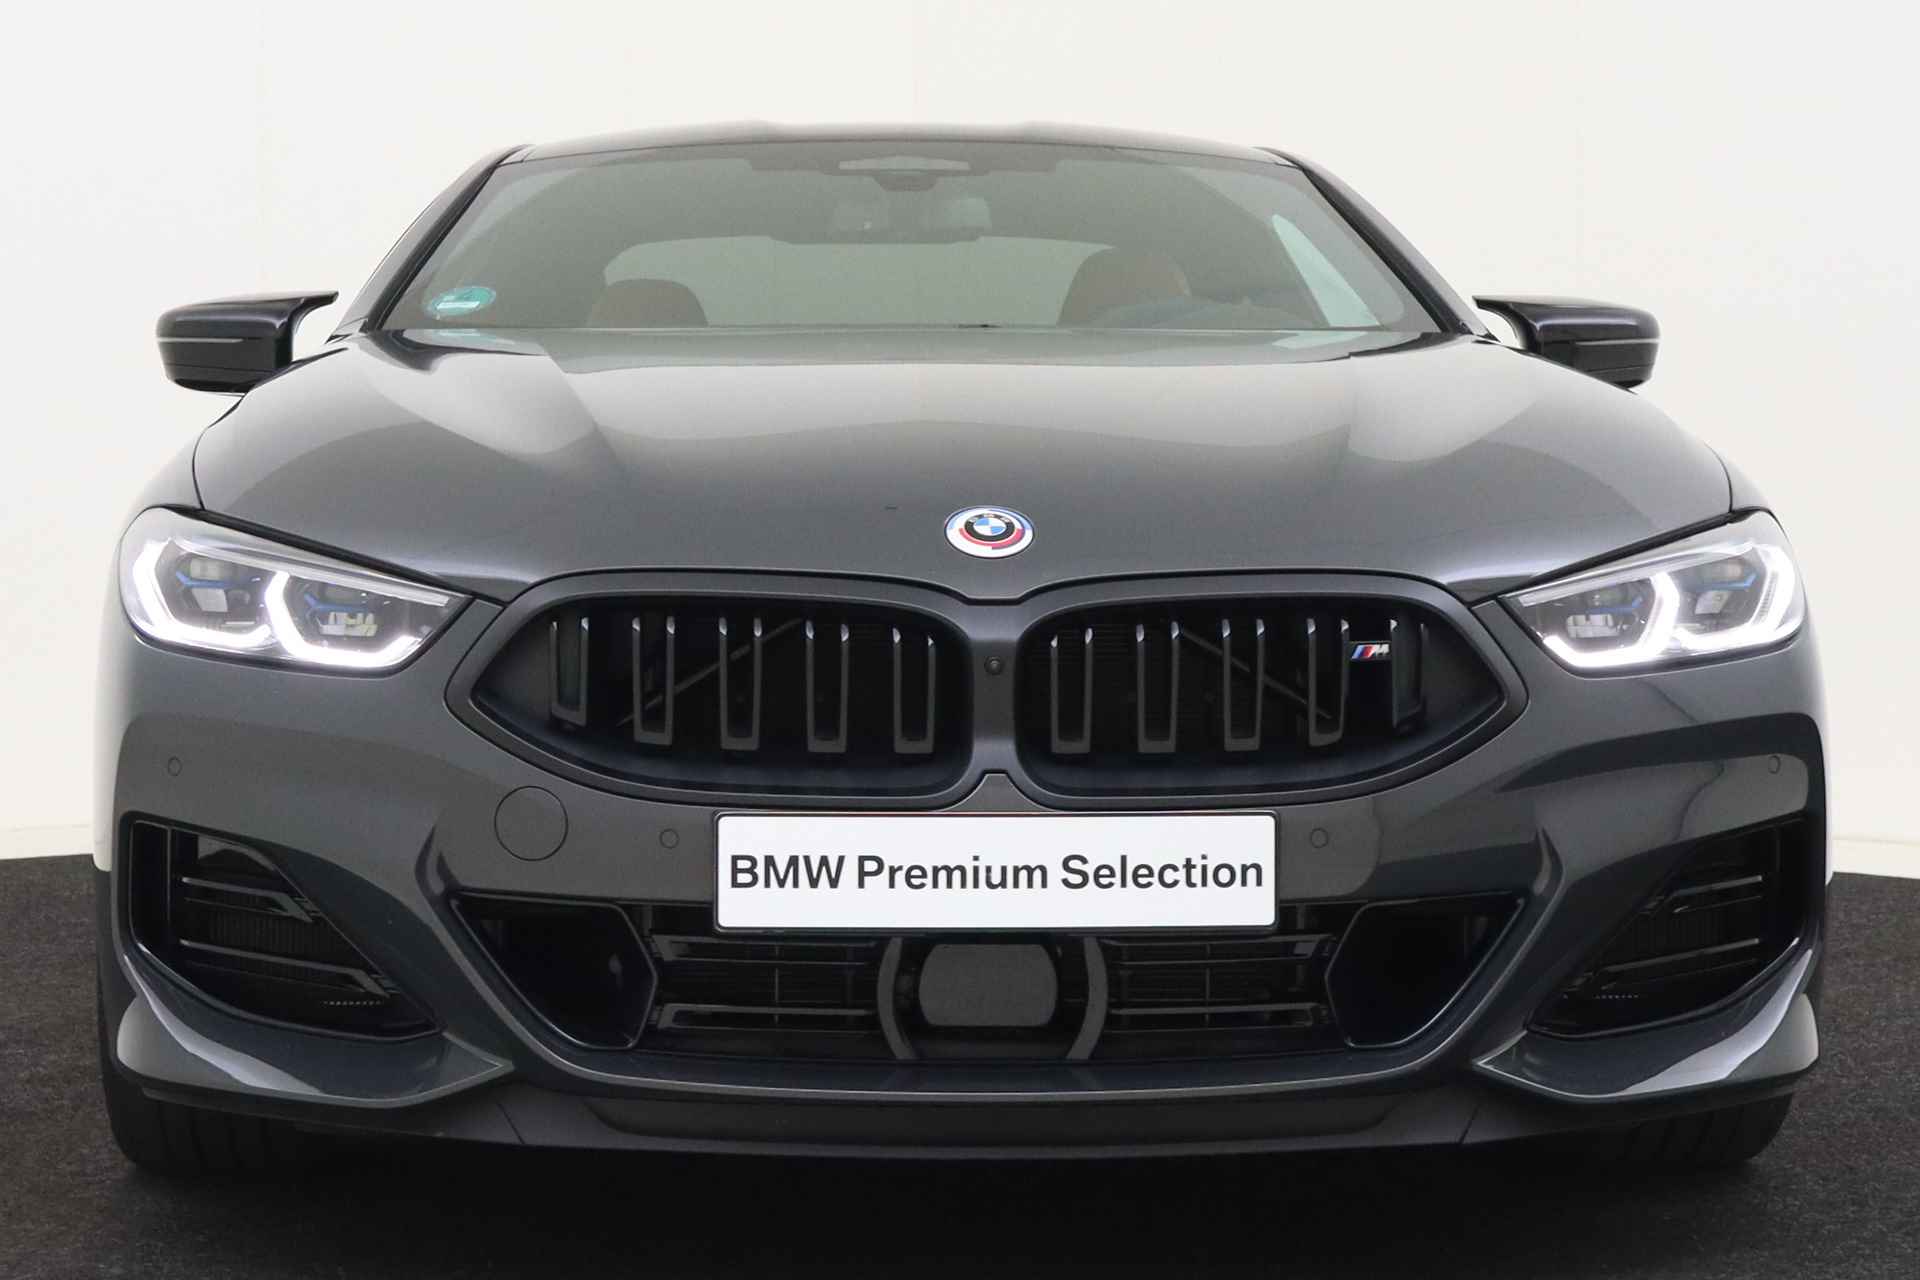 BMW 8 Serie M850i xDrive High Executive M Sport / M Carbondak / Laserlight / Bowers & Wilkins / 50 Jahre M Edition / Driving Assistant Professional / Soft Close - 5/81